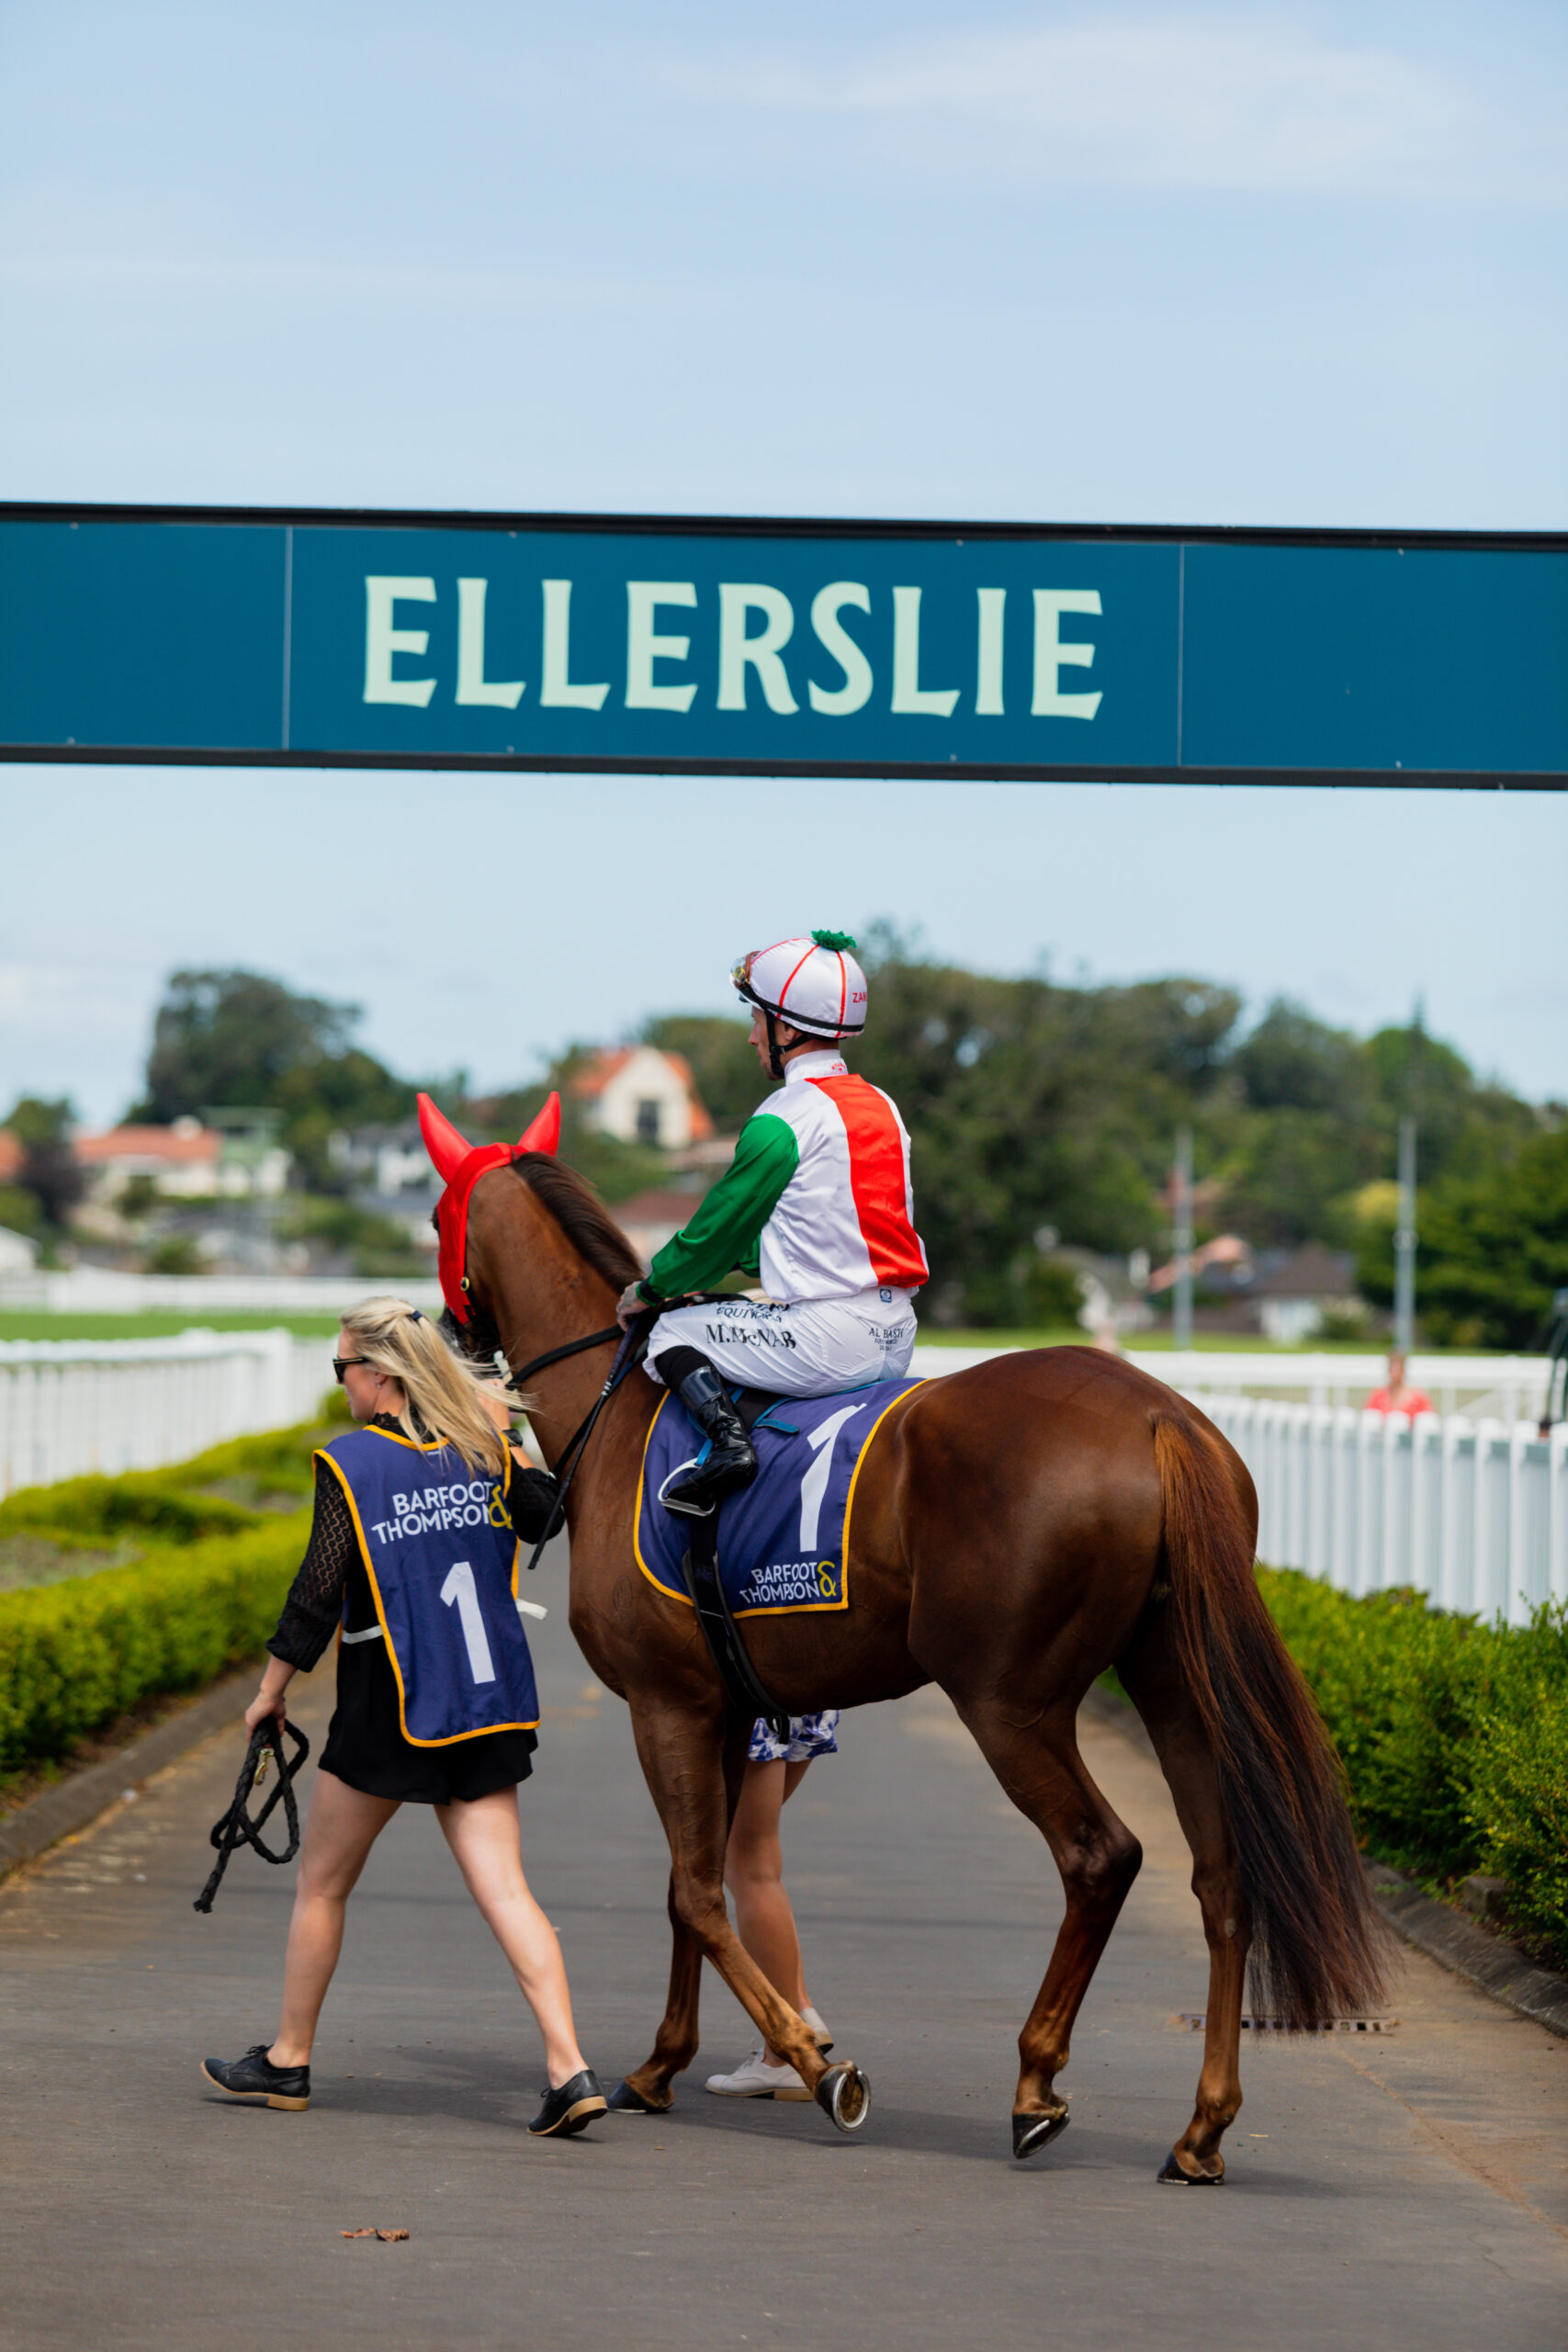 Media Release | Plan of action formulated following investigation into Ellerslie Racecourse meeting abandonment